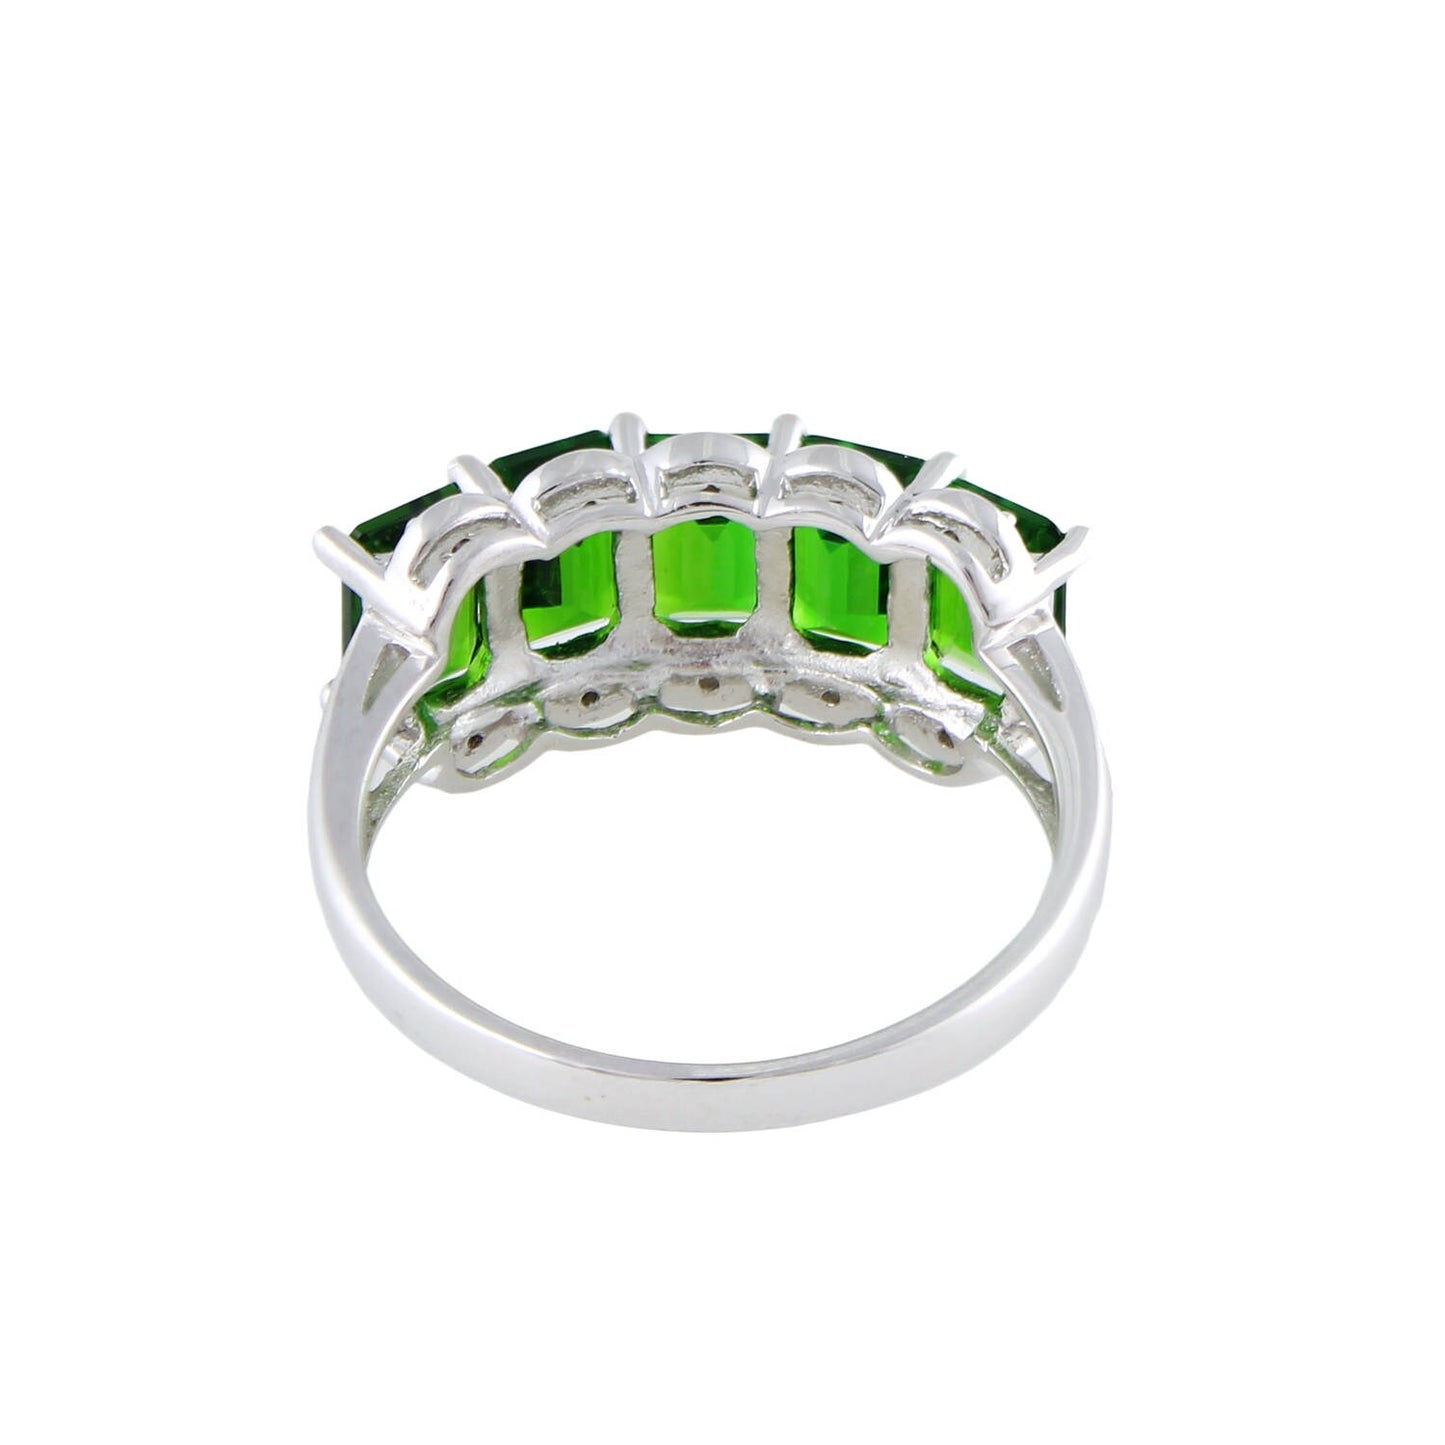 Pinctore Rhodium Over Sterling Silver 3.2ctw Chrome Diopside & 0.04ctw Diamond Ring SZ 7